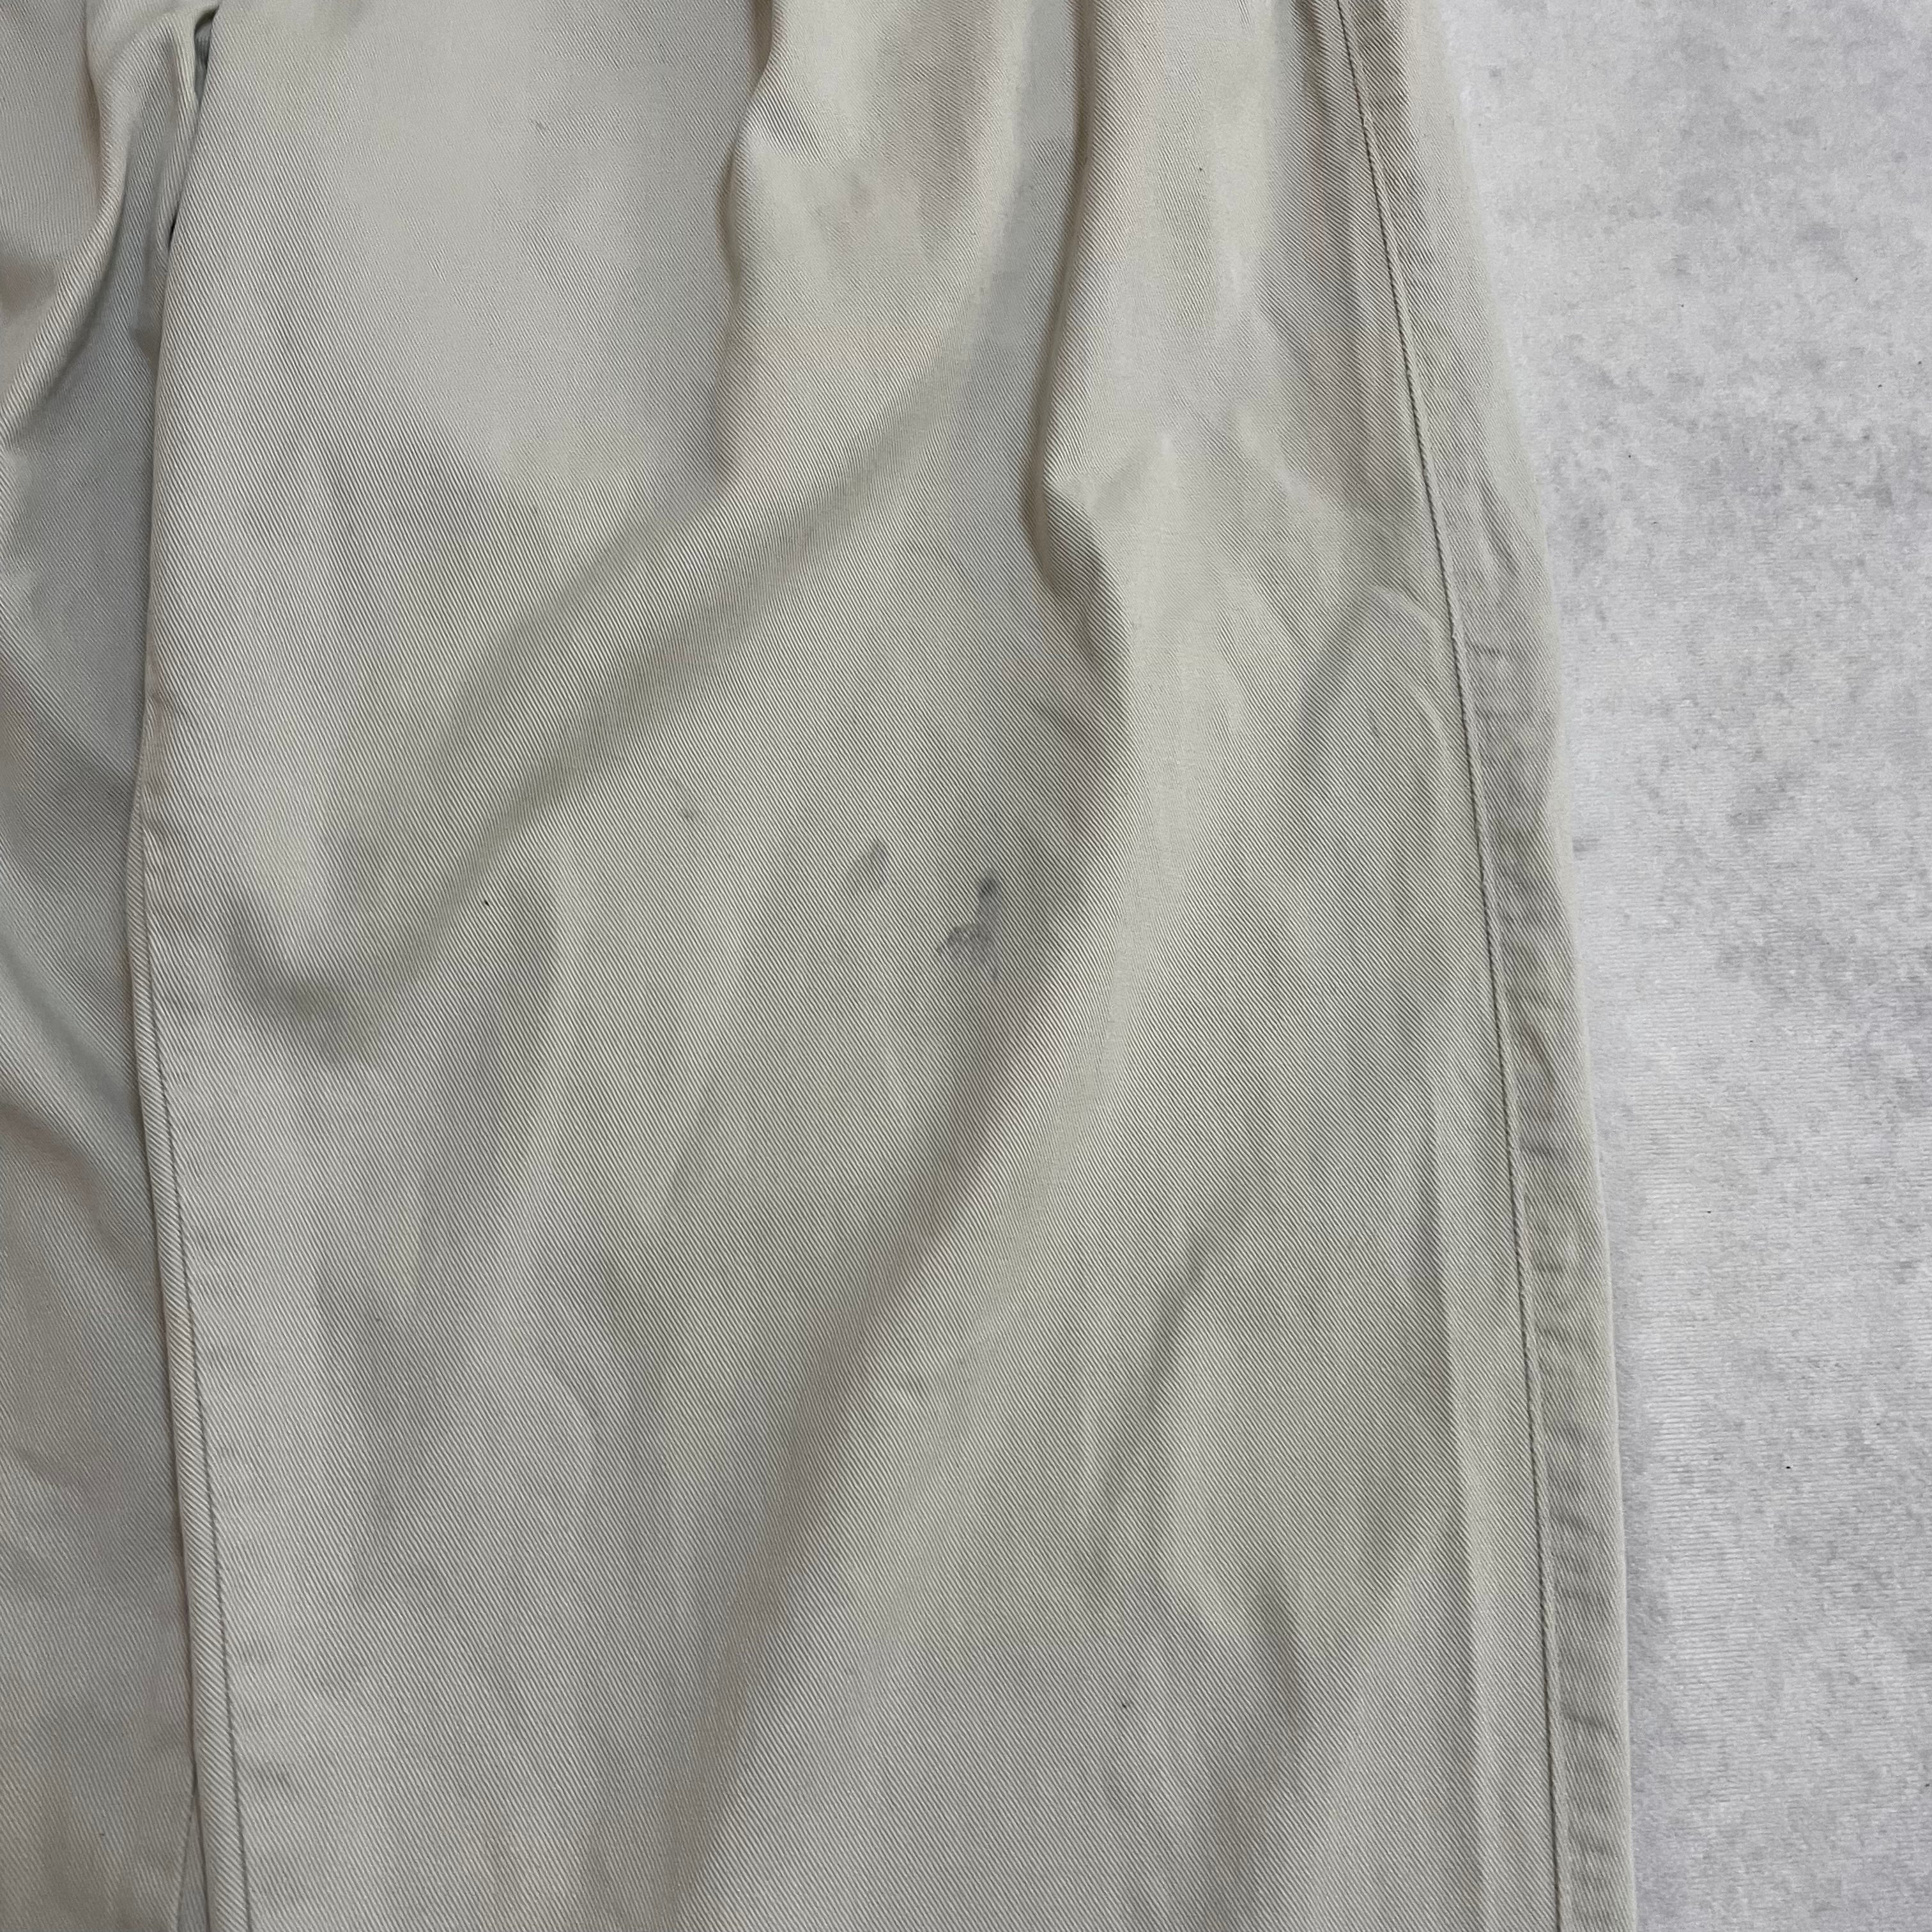 80s Polo by Ralph Lauren 2-tack Chino pants Made in U.S.A. | 0 0 2